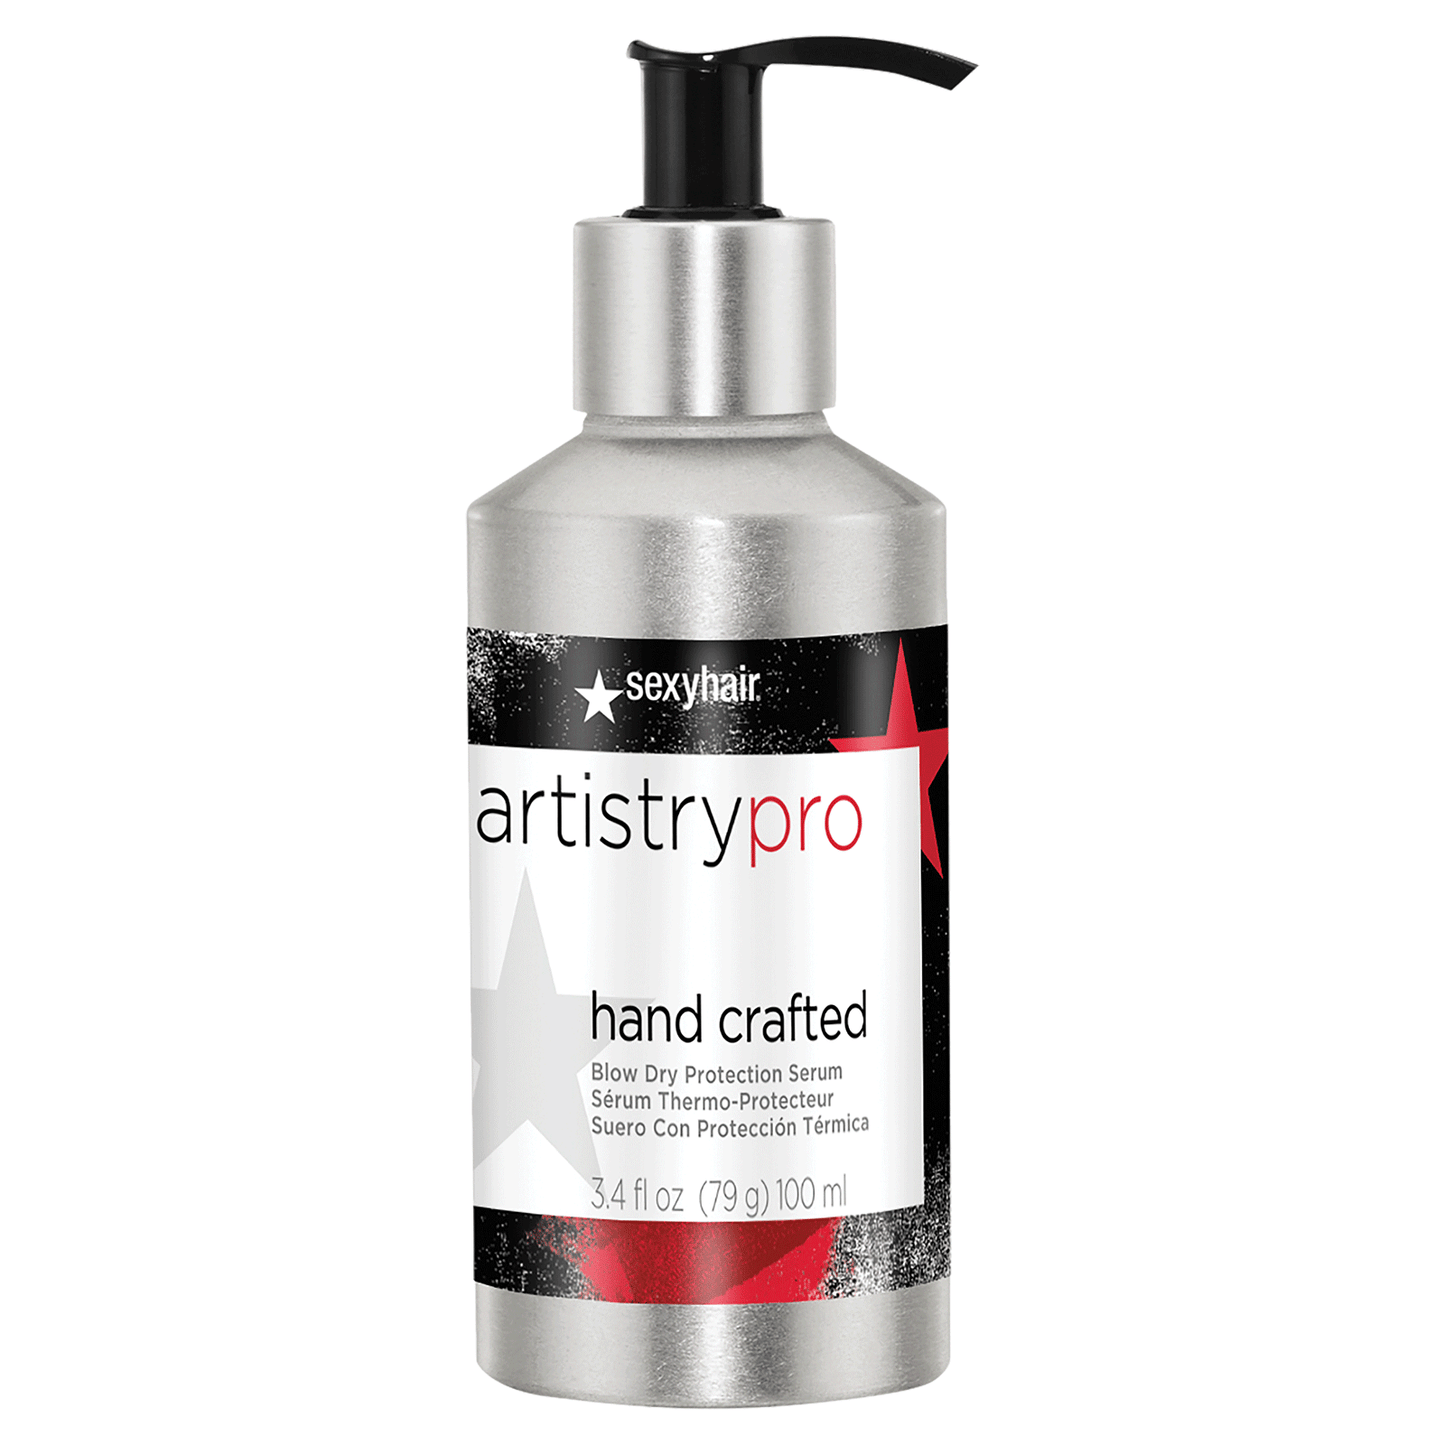 Sexy Hair ArtistryPro Hand Crafted Blow Dry Protection Serum 3.4 fl.oz.